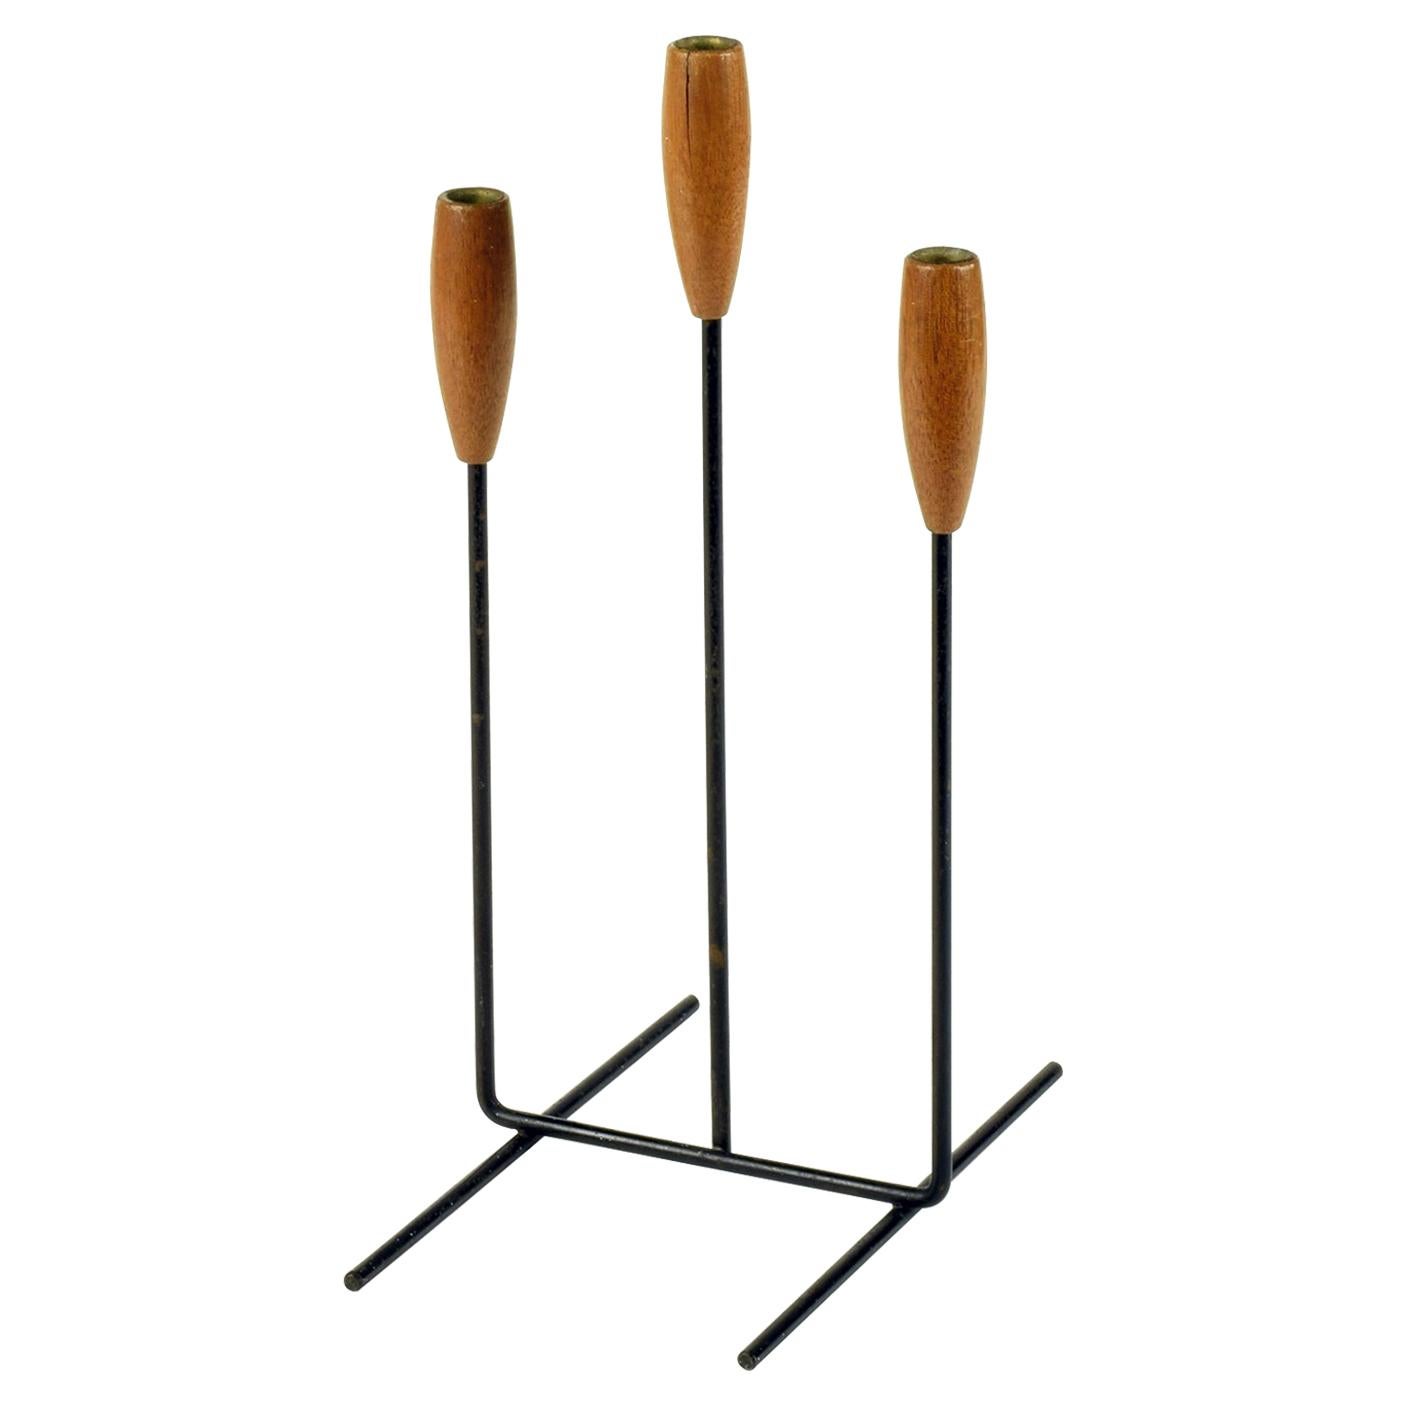 Trio of Mid Century Sculptural Teak Candle Holders at 1stDibs